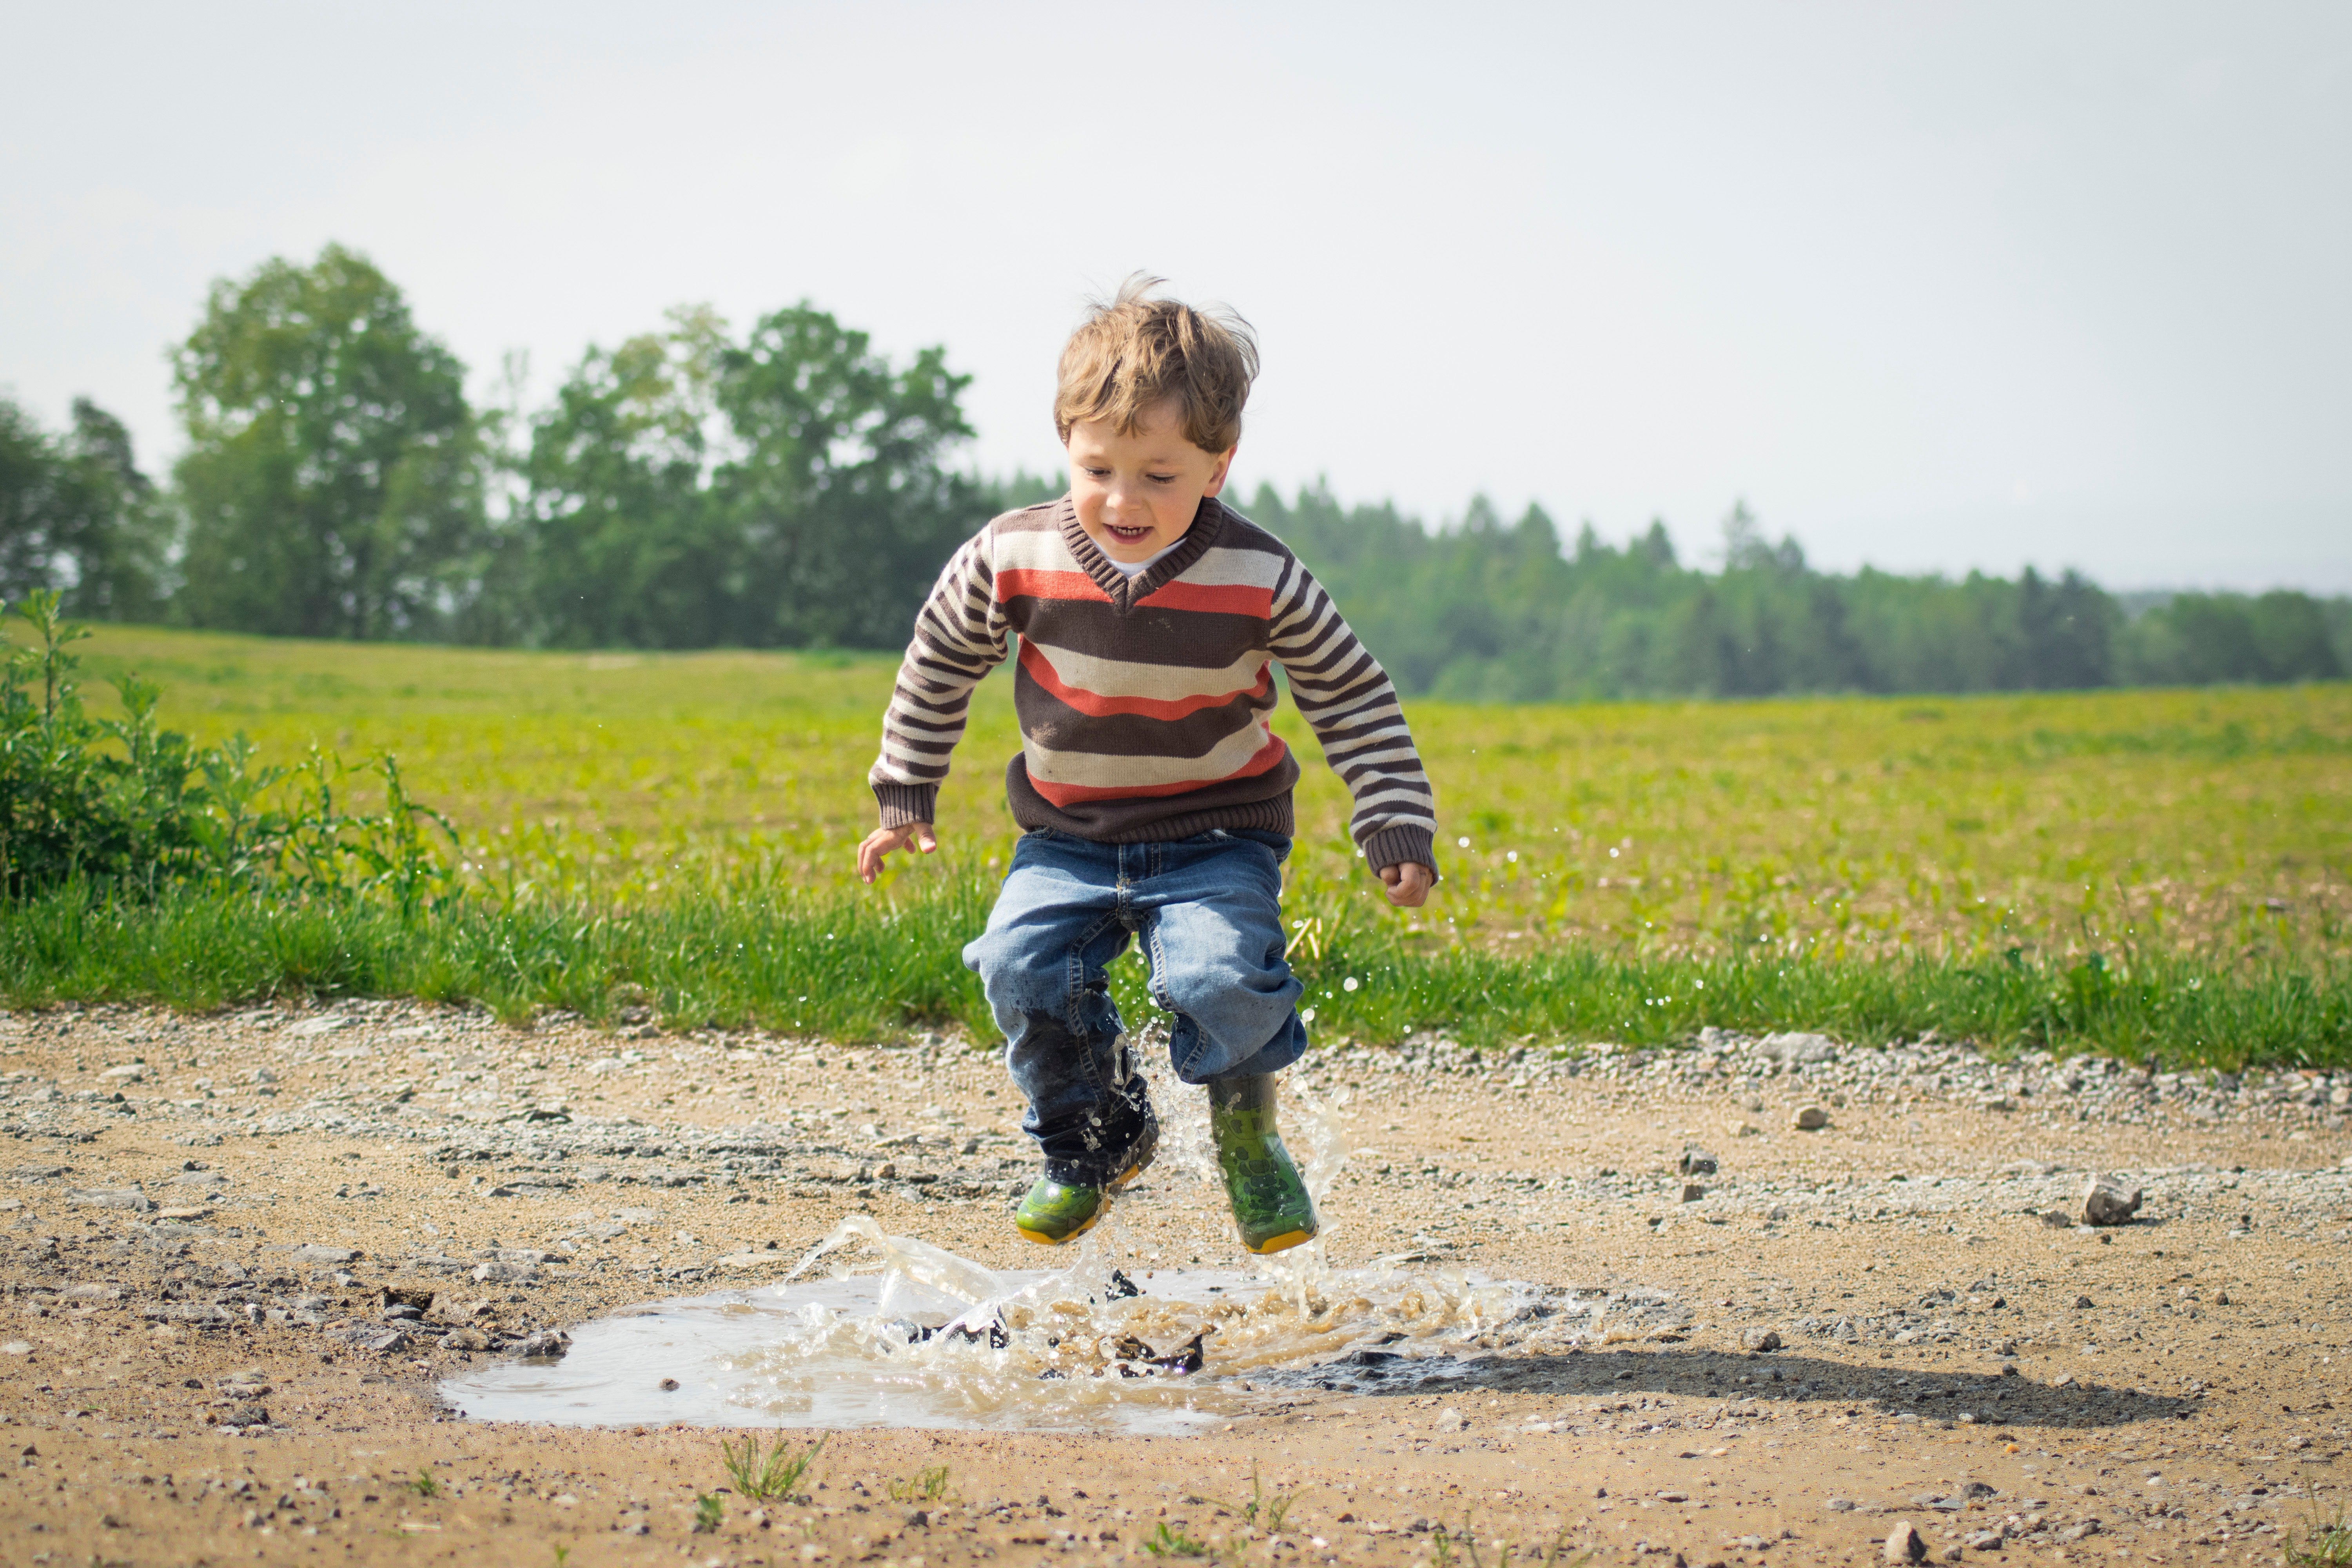 Young boy splashing in a puddle. | Source: Luna Lovegood/Pexels